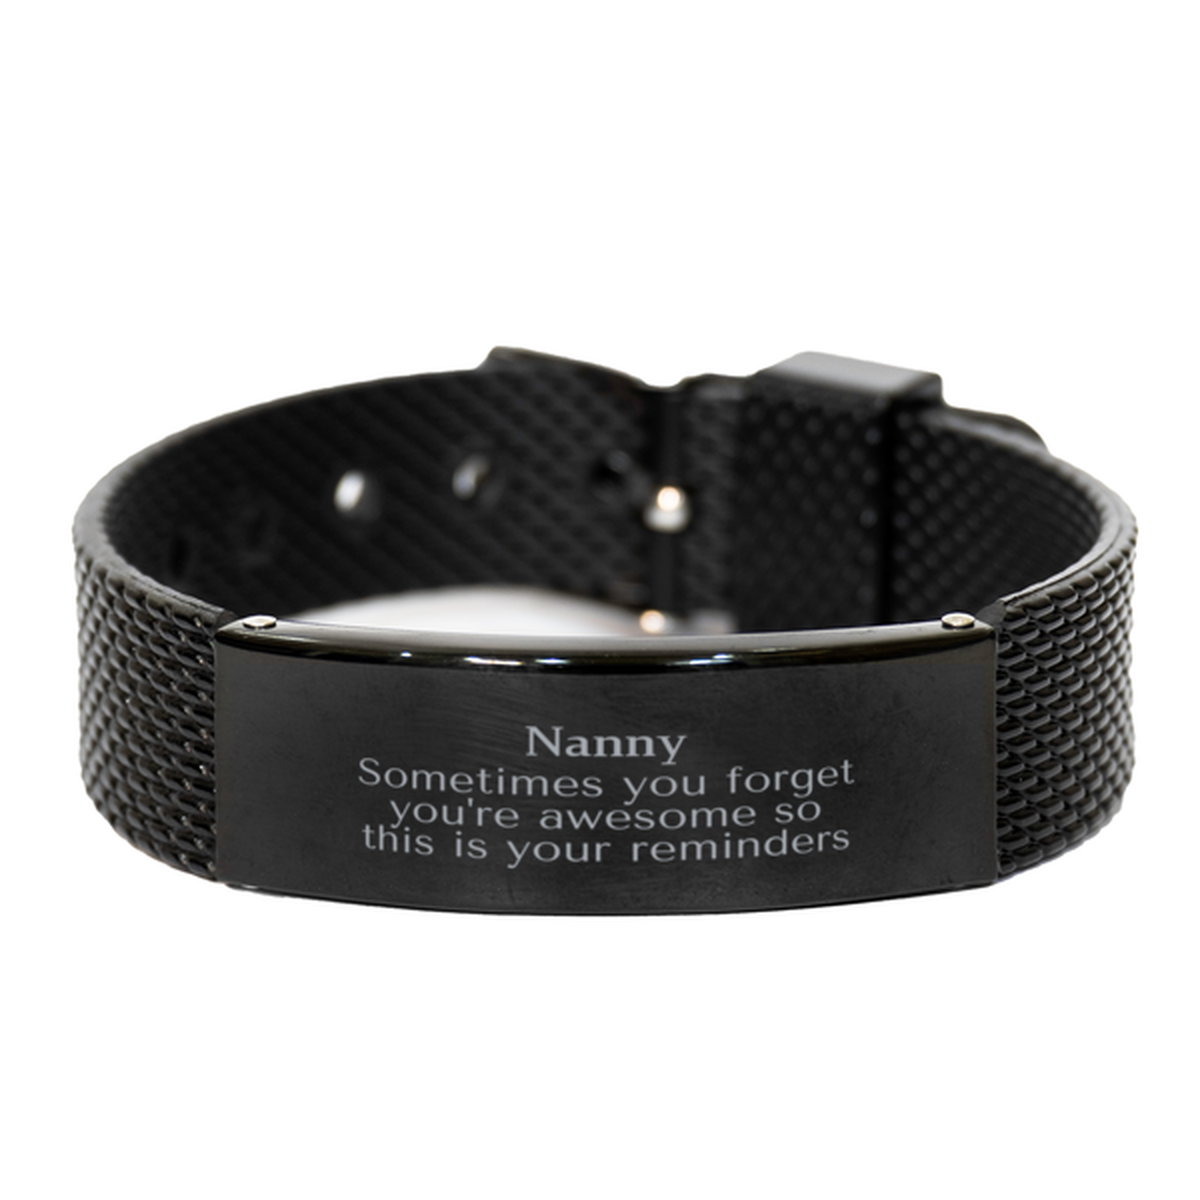 Sentimental Nanny Black Shark Mesh Bracelet, Nanny Sometimes you forget you're awesome so this is your reminders, Graduation Christmas Birthday Gifts for Nanny, Men, Women, Coworkers